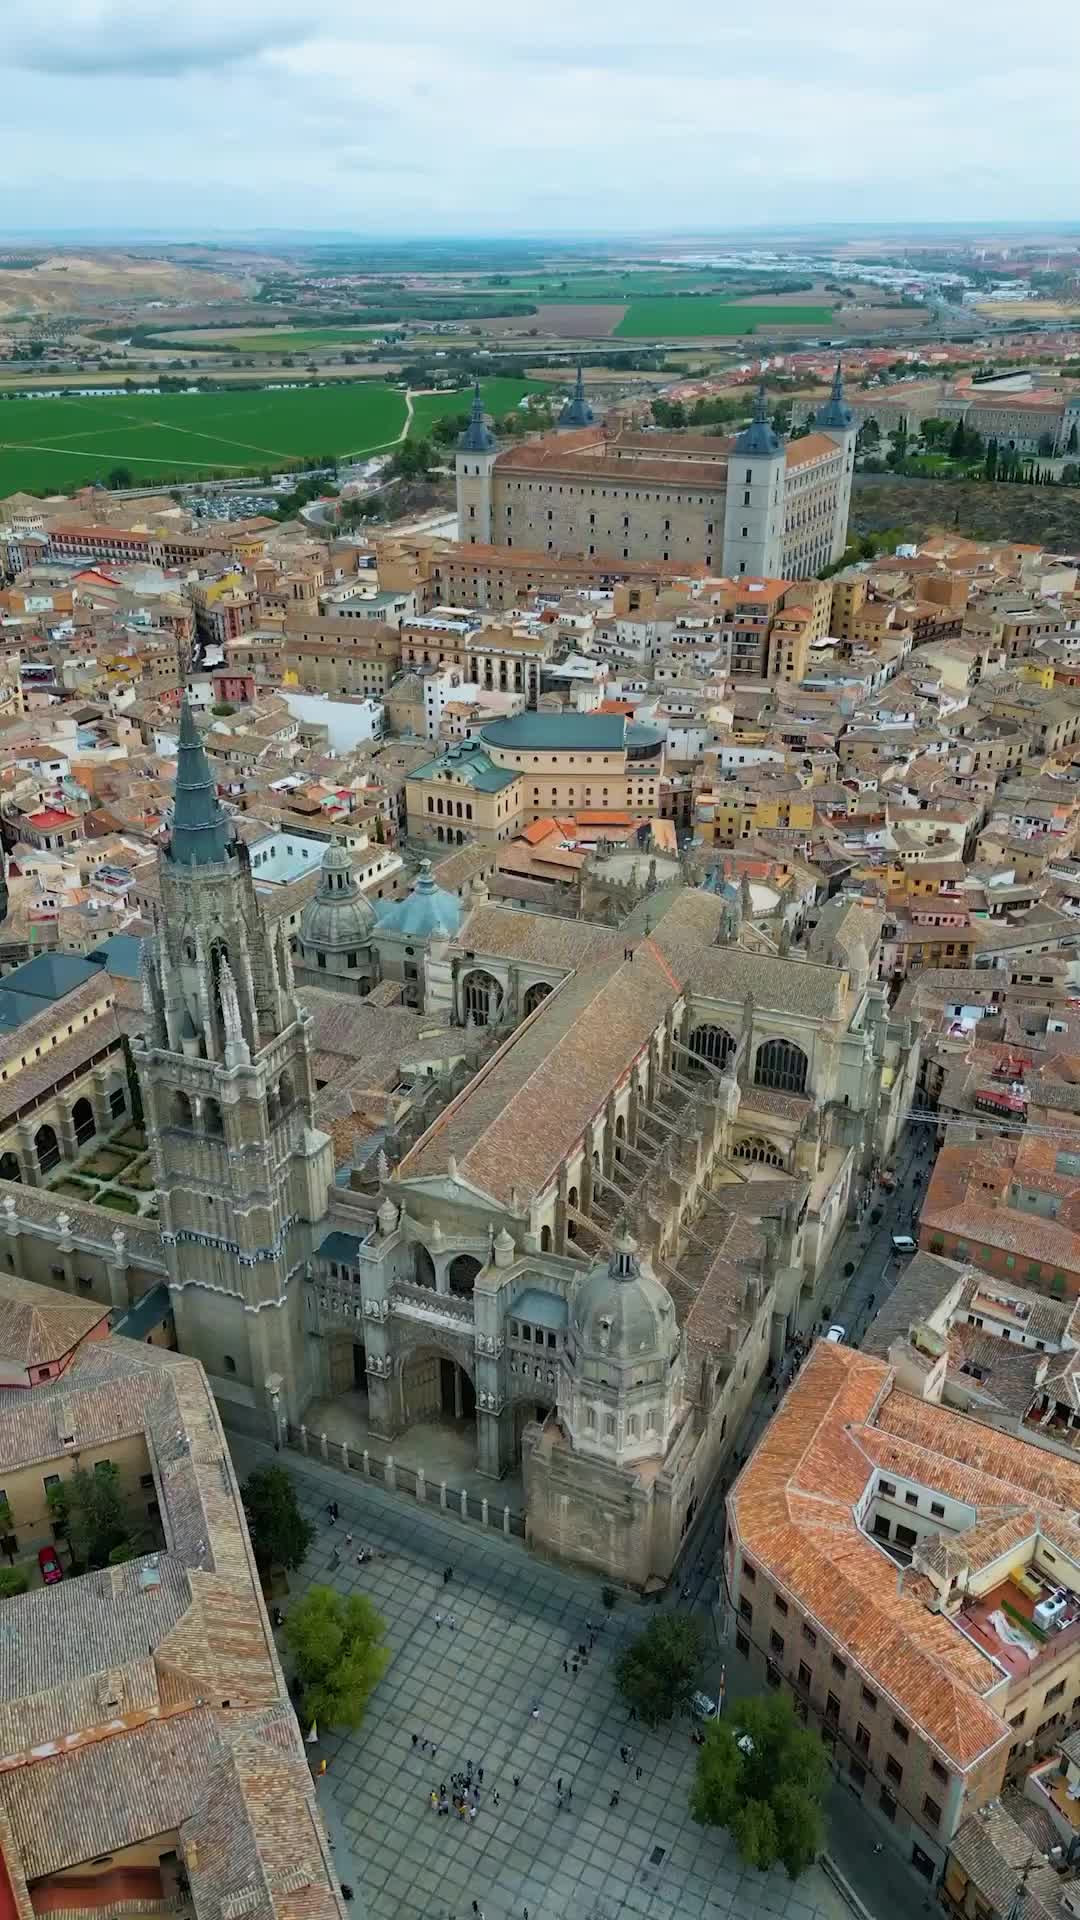 Toledo: From Roman Conquest to Imperial City